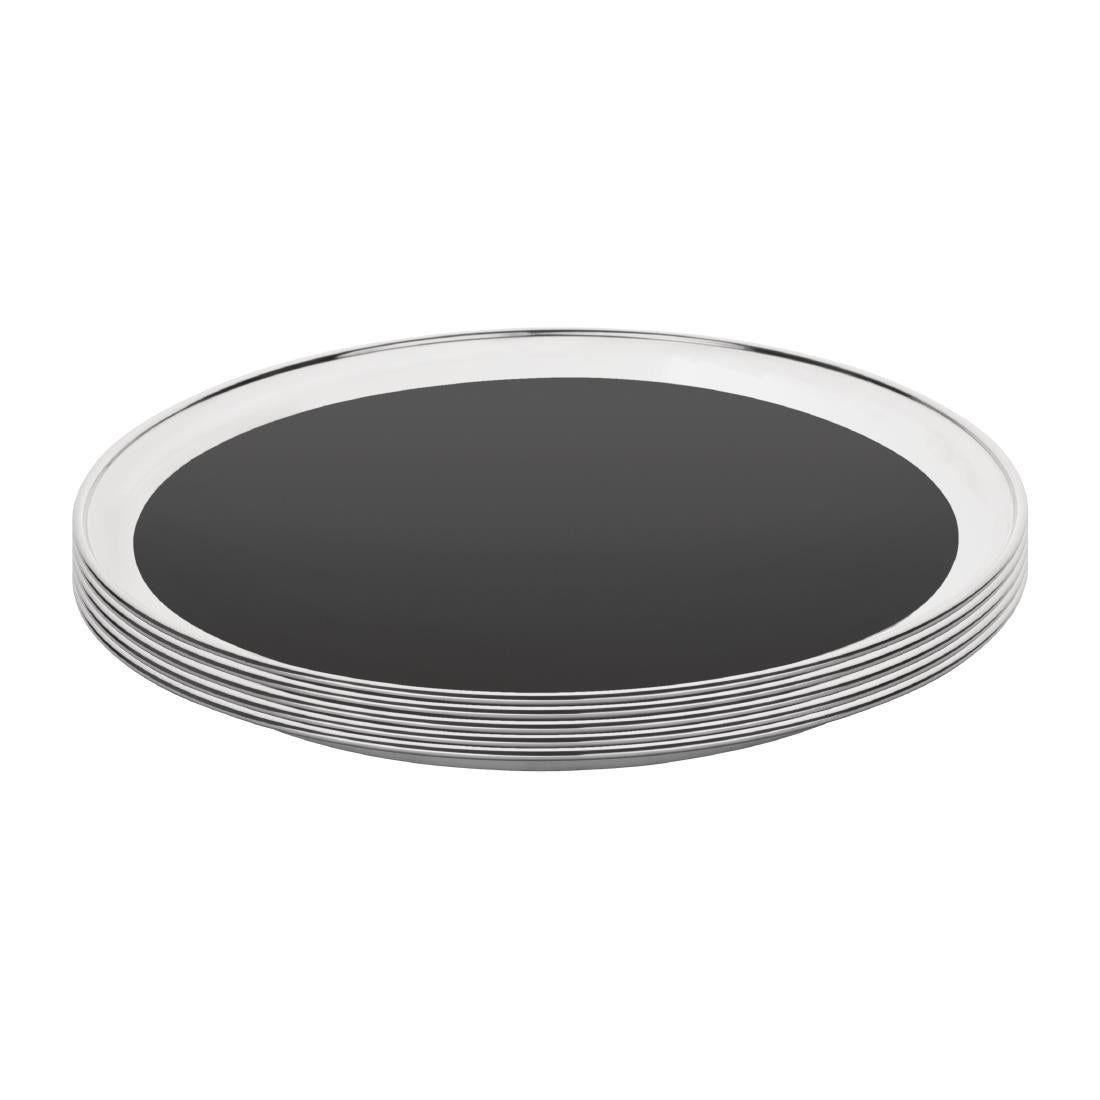 Olympia Stainless Steel Round Non-Slip Bar Tray 355mm